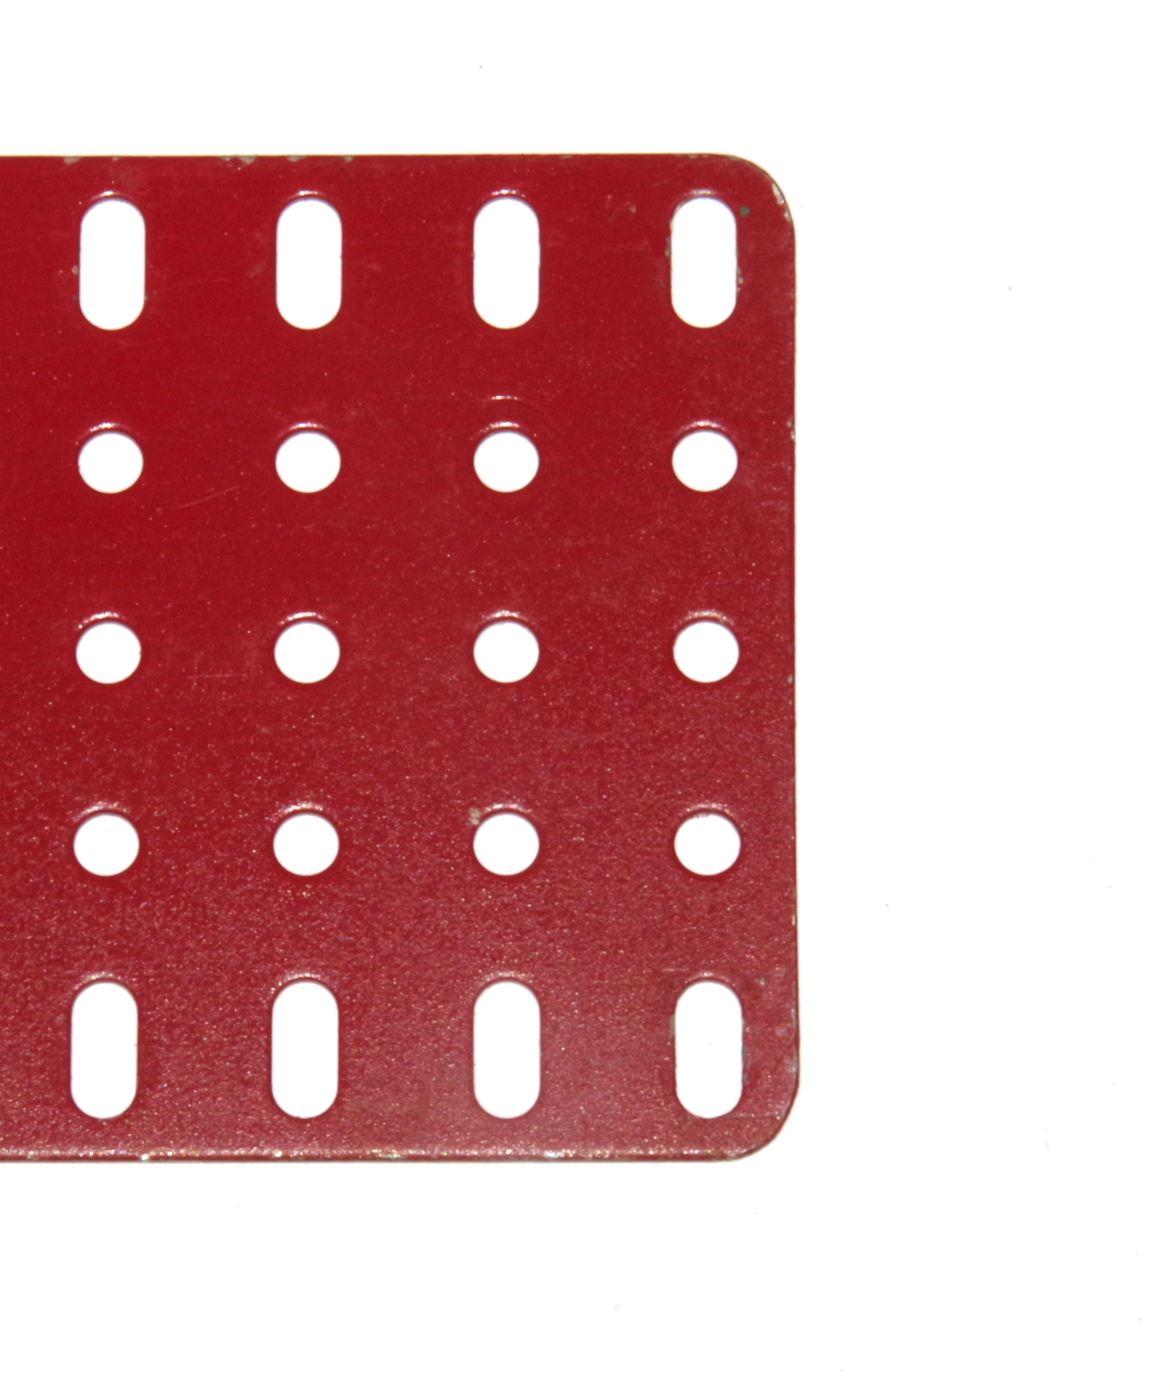 75b Flat Plate 5x19 Hole Red Used